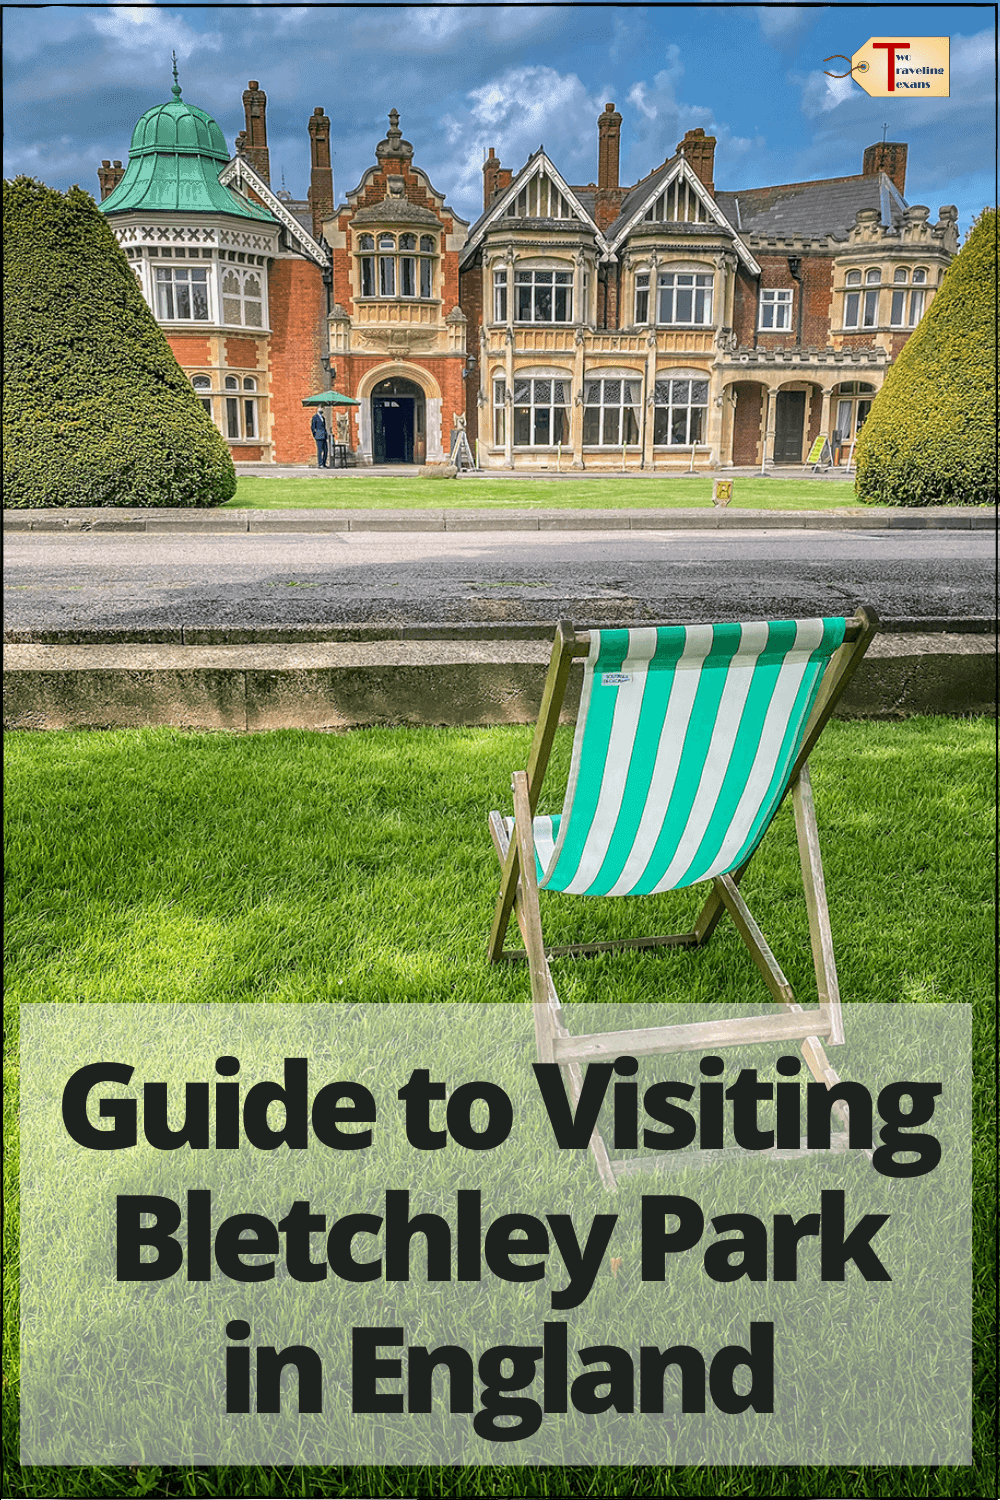 bletchley park mansion with a lounge chair and text "Guide to Visiting Bletchley Park in England"